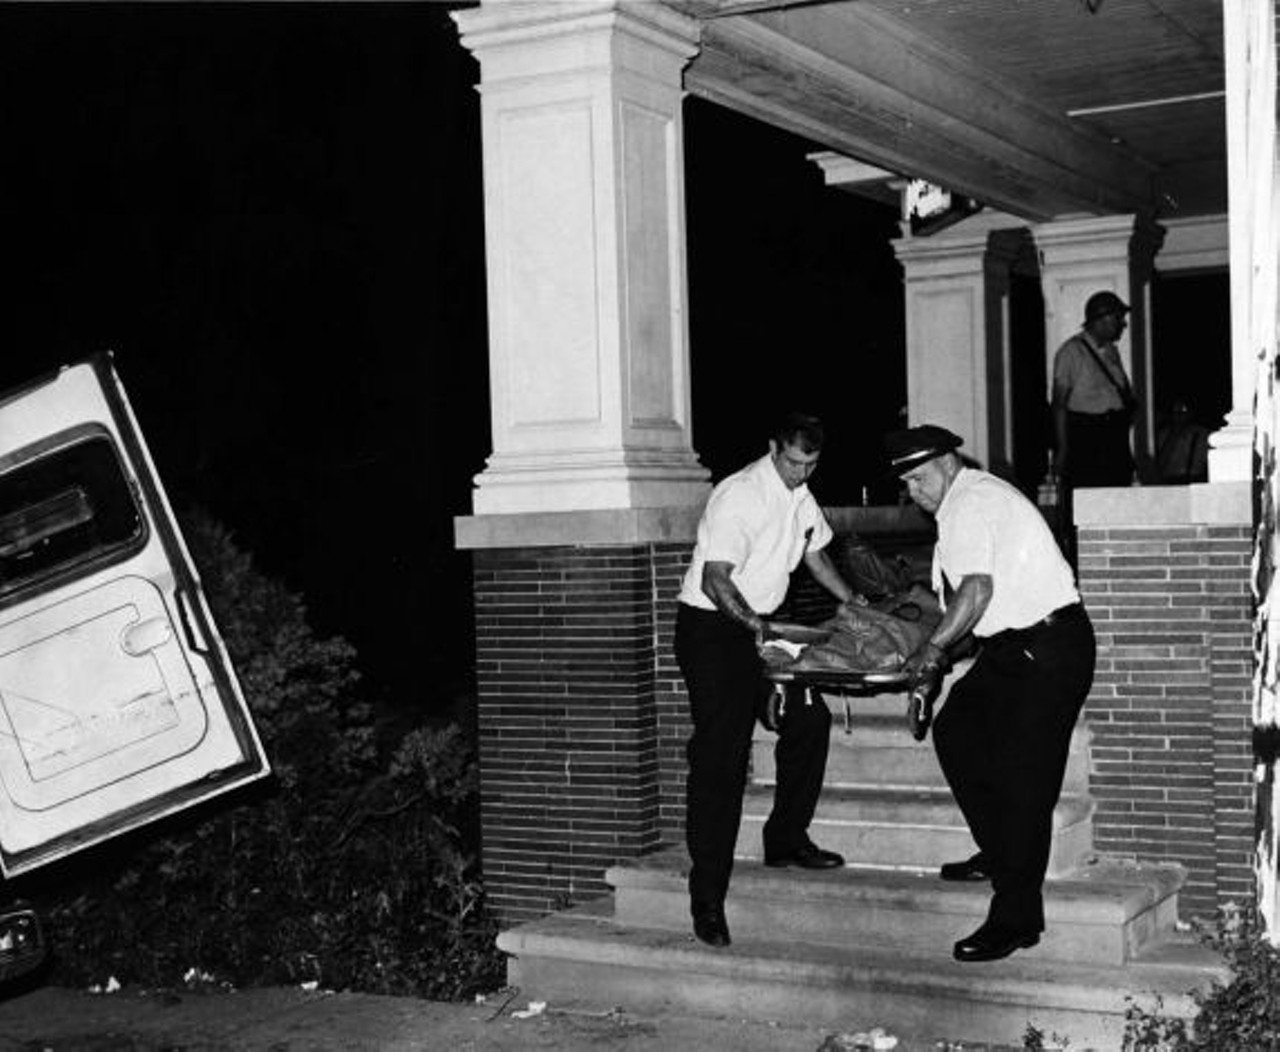 Countless allegations of police brutality followed in the wake of the riots. Three young black men were killed and nine others beaten by members of the Detroit Police Department in what became known as the Algiers Motel Incident. Three officers faced charges for their role in the incident but none were convicted. 